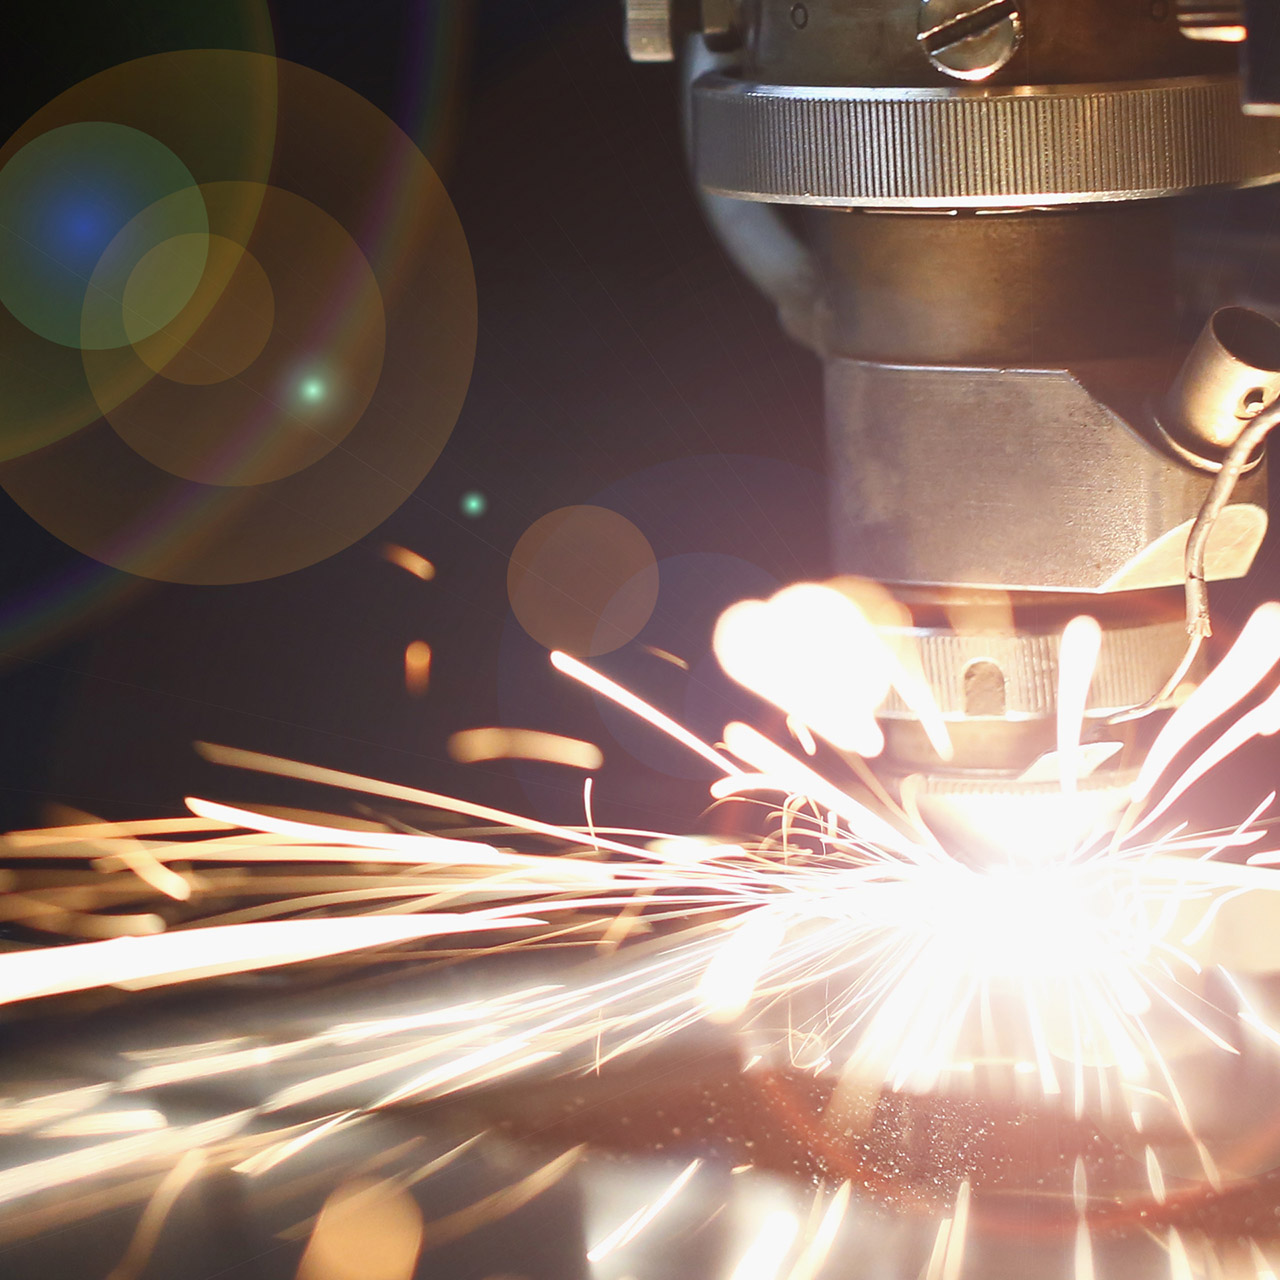 Sparks fly out machine head for metal processing